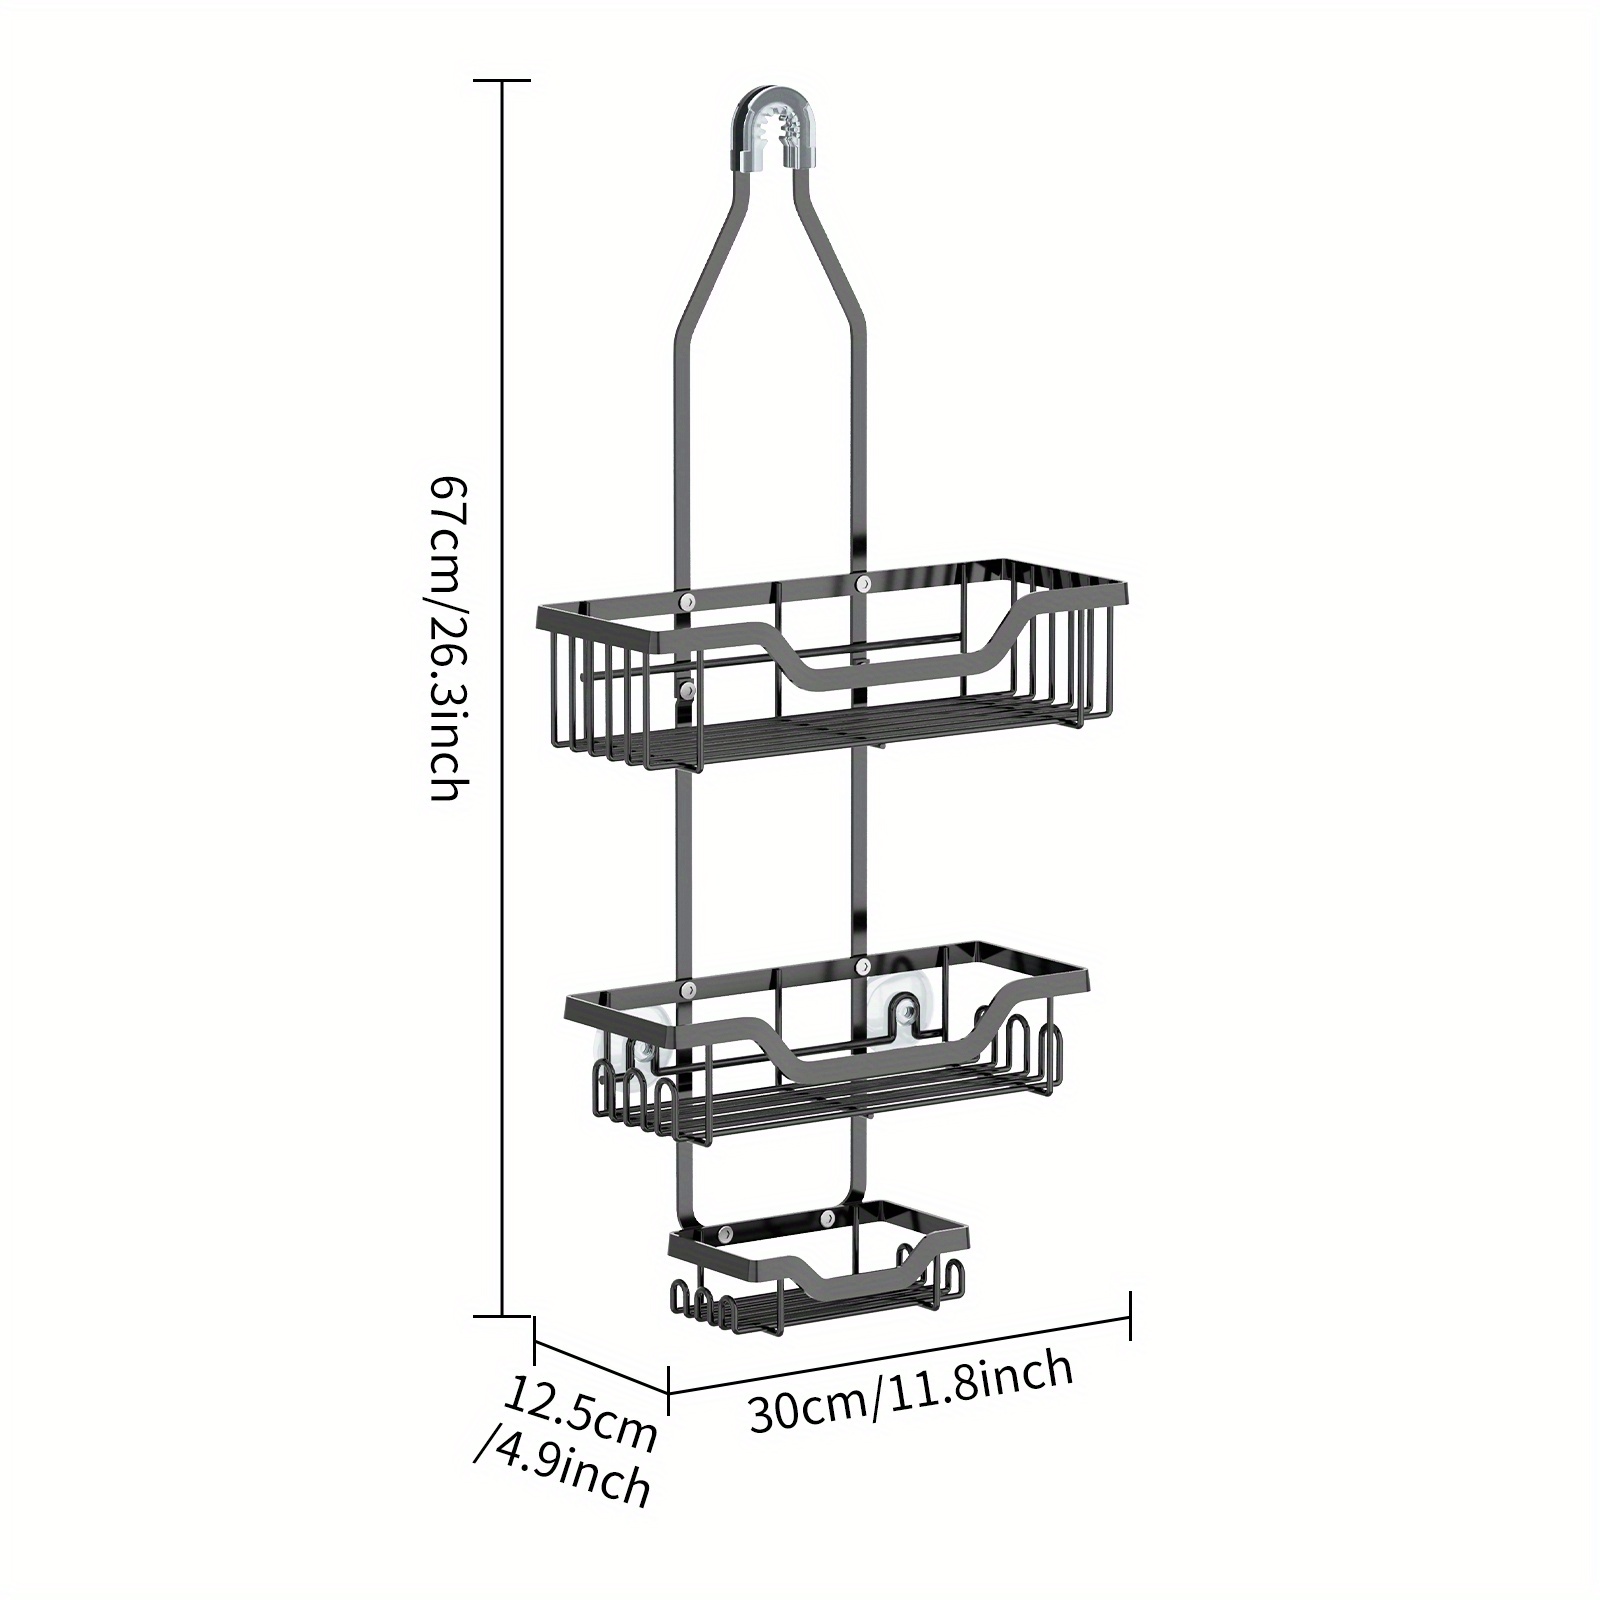 Long Hanging Shower Caddy